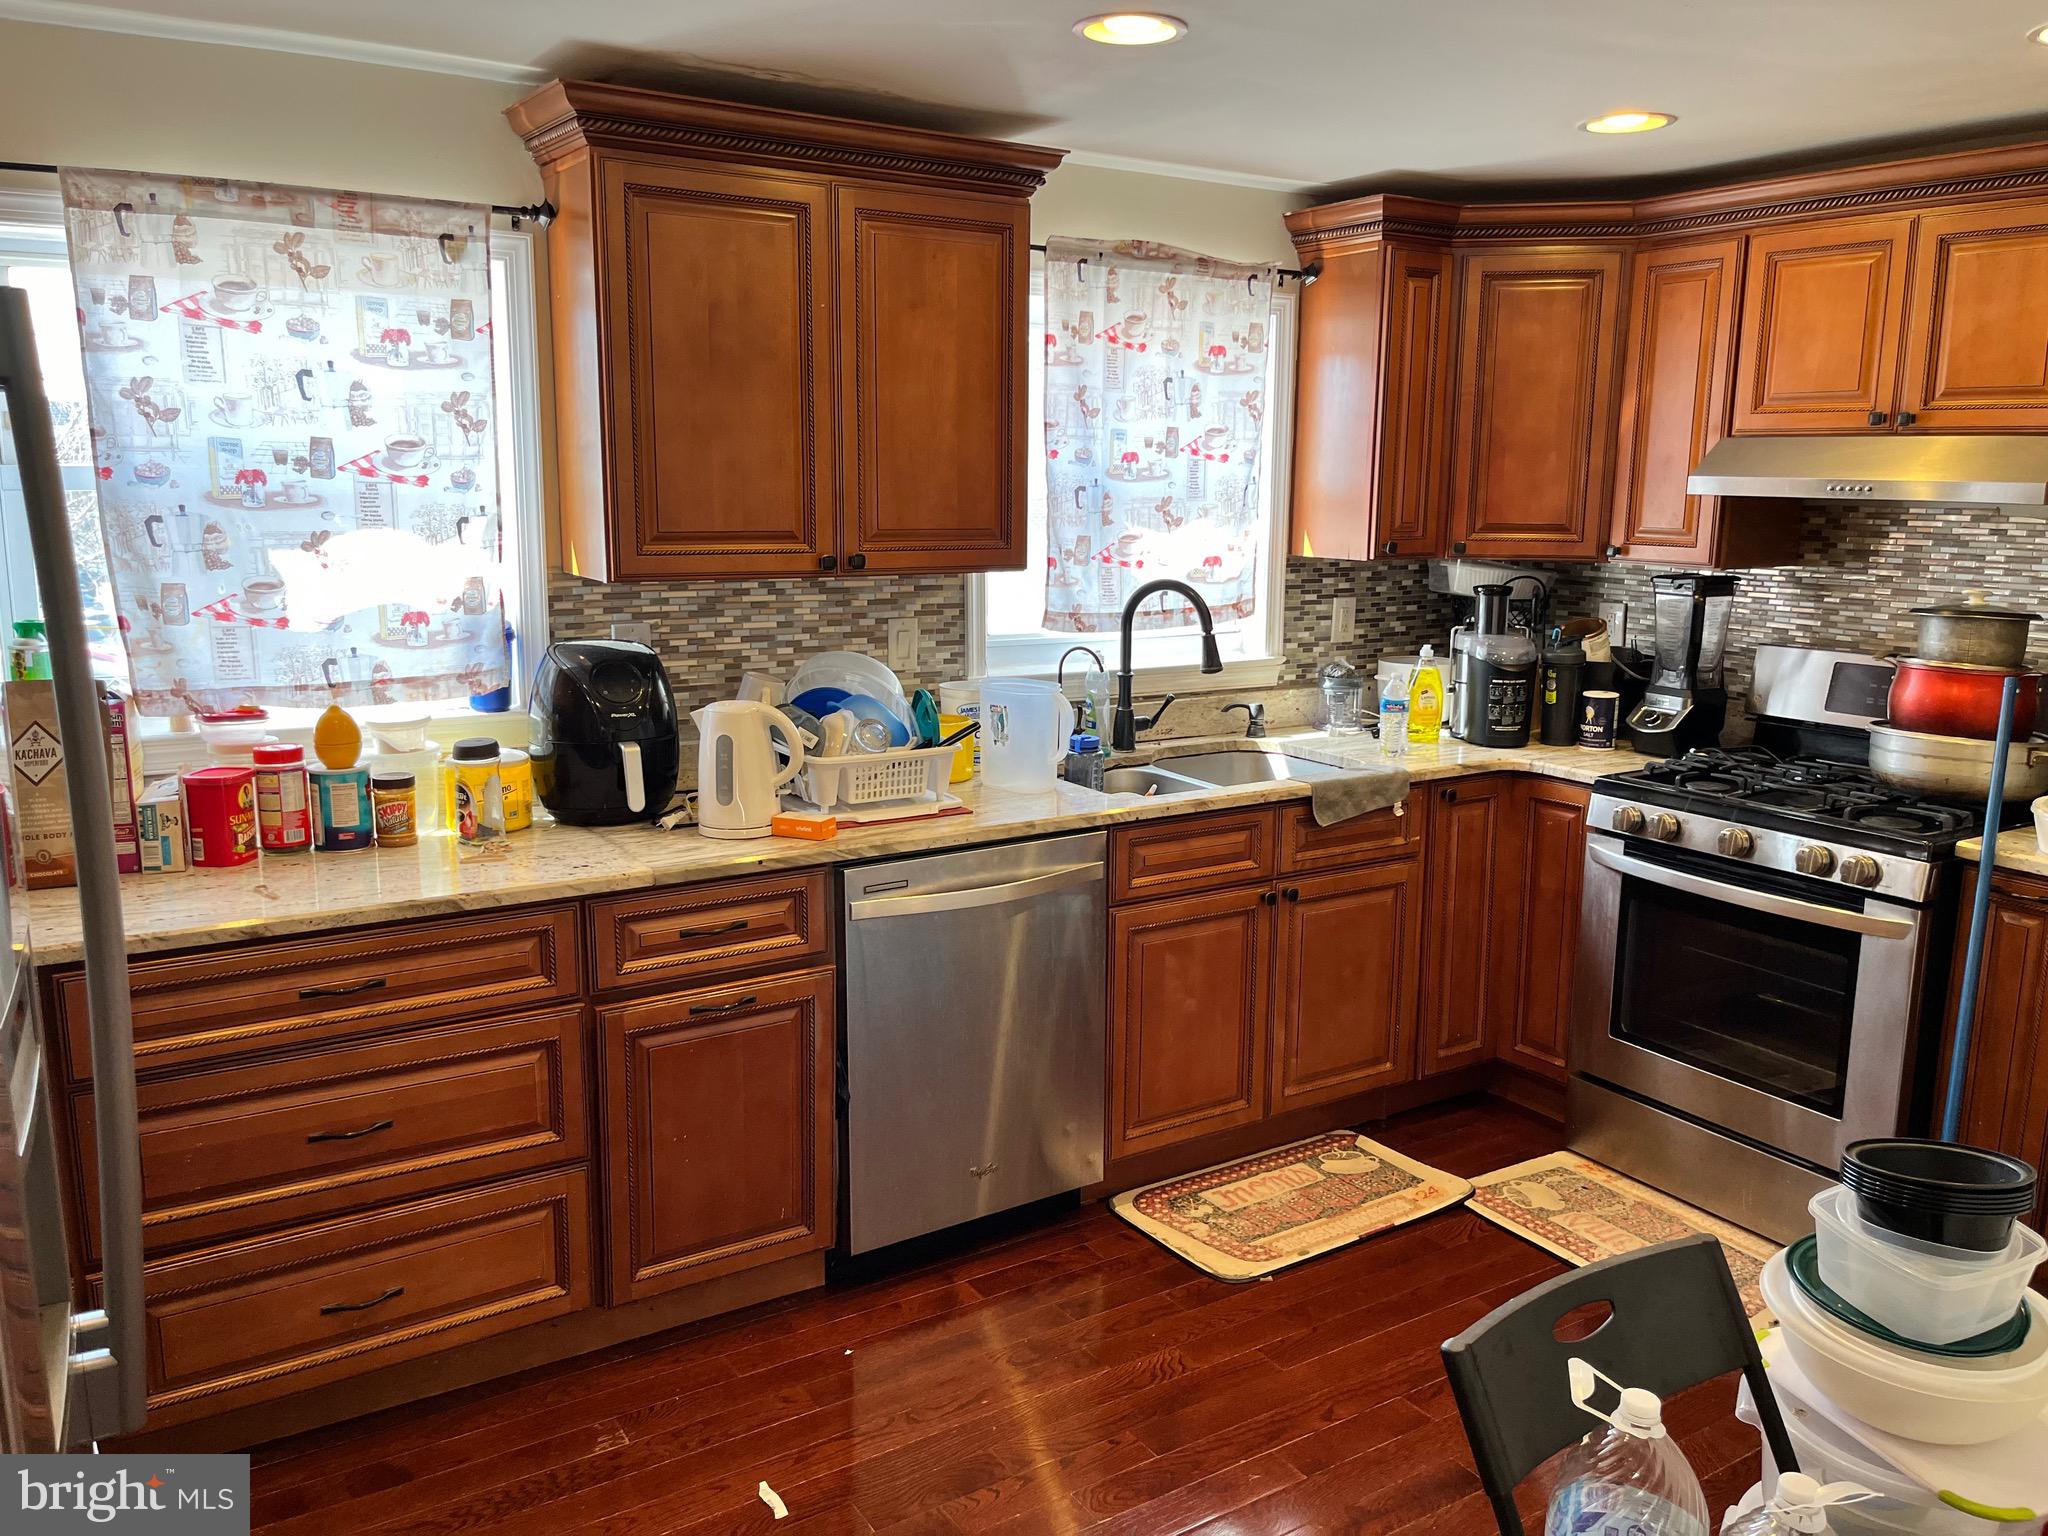 a kitchen with stainless steel appliances kitchen island granite countertop a sink dishwasher stove and cabinets